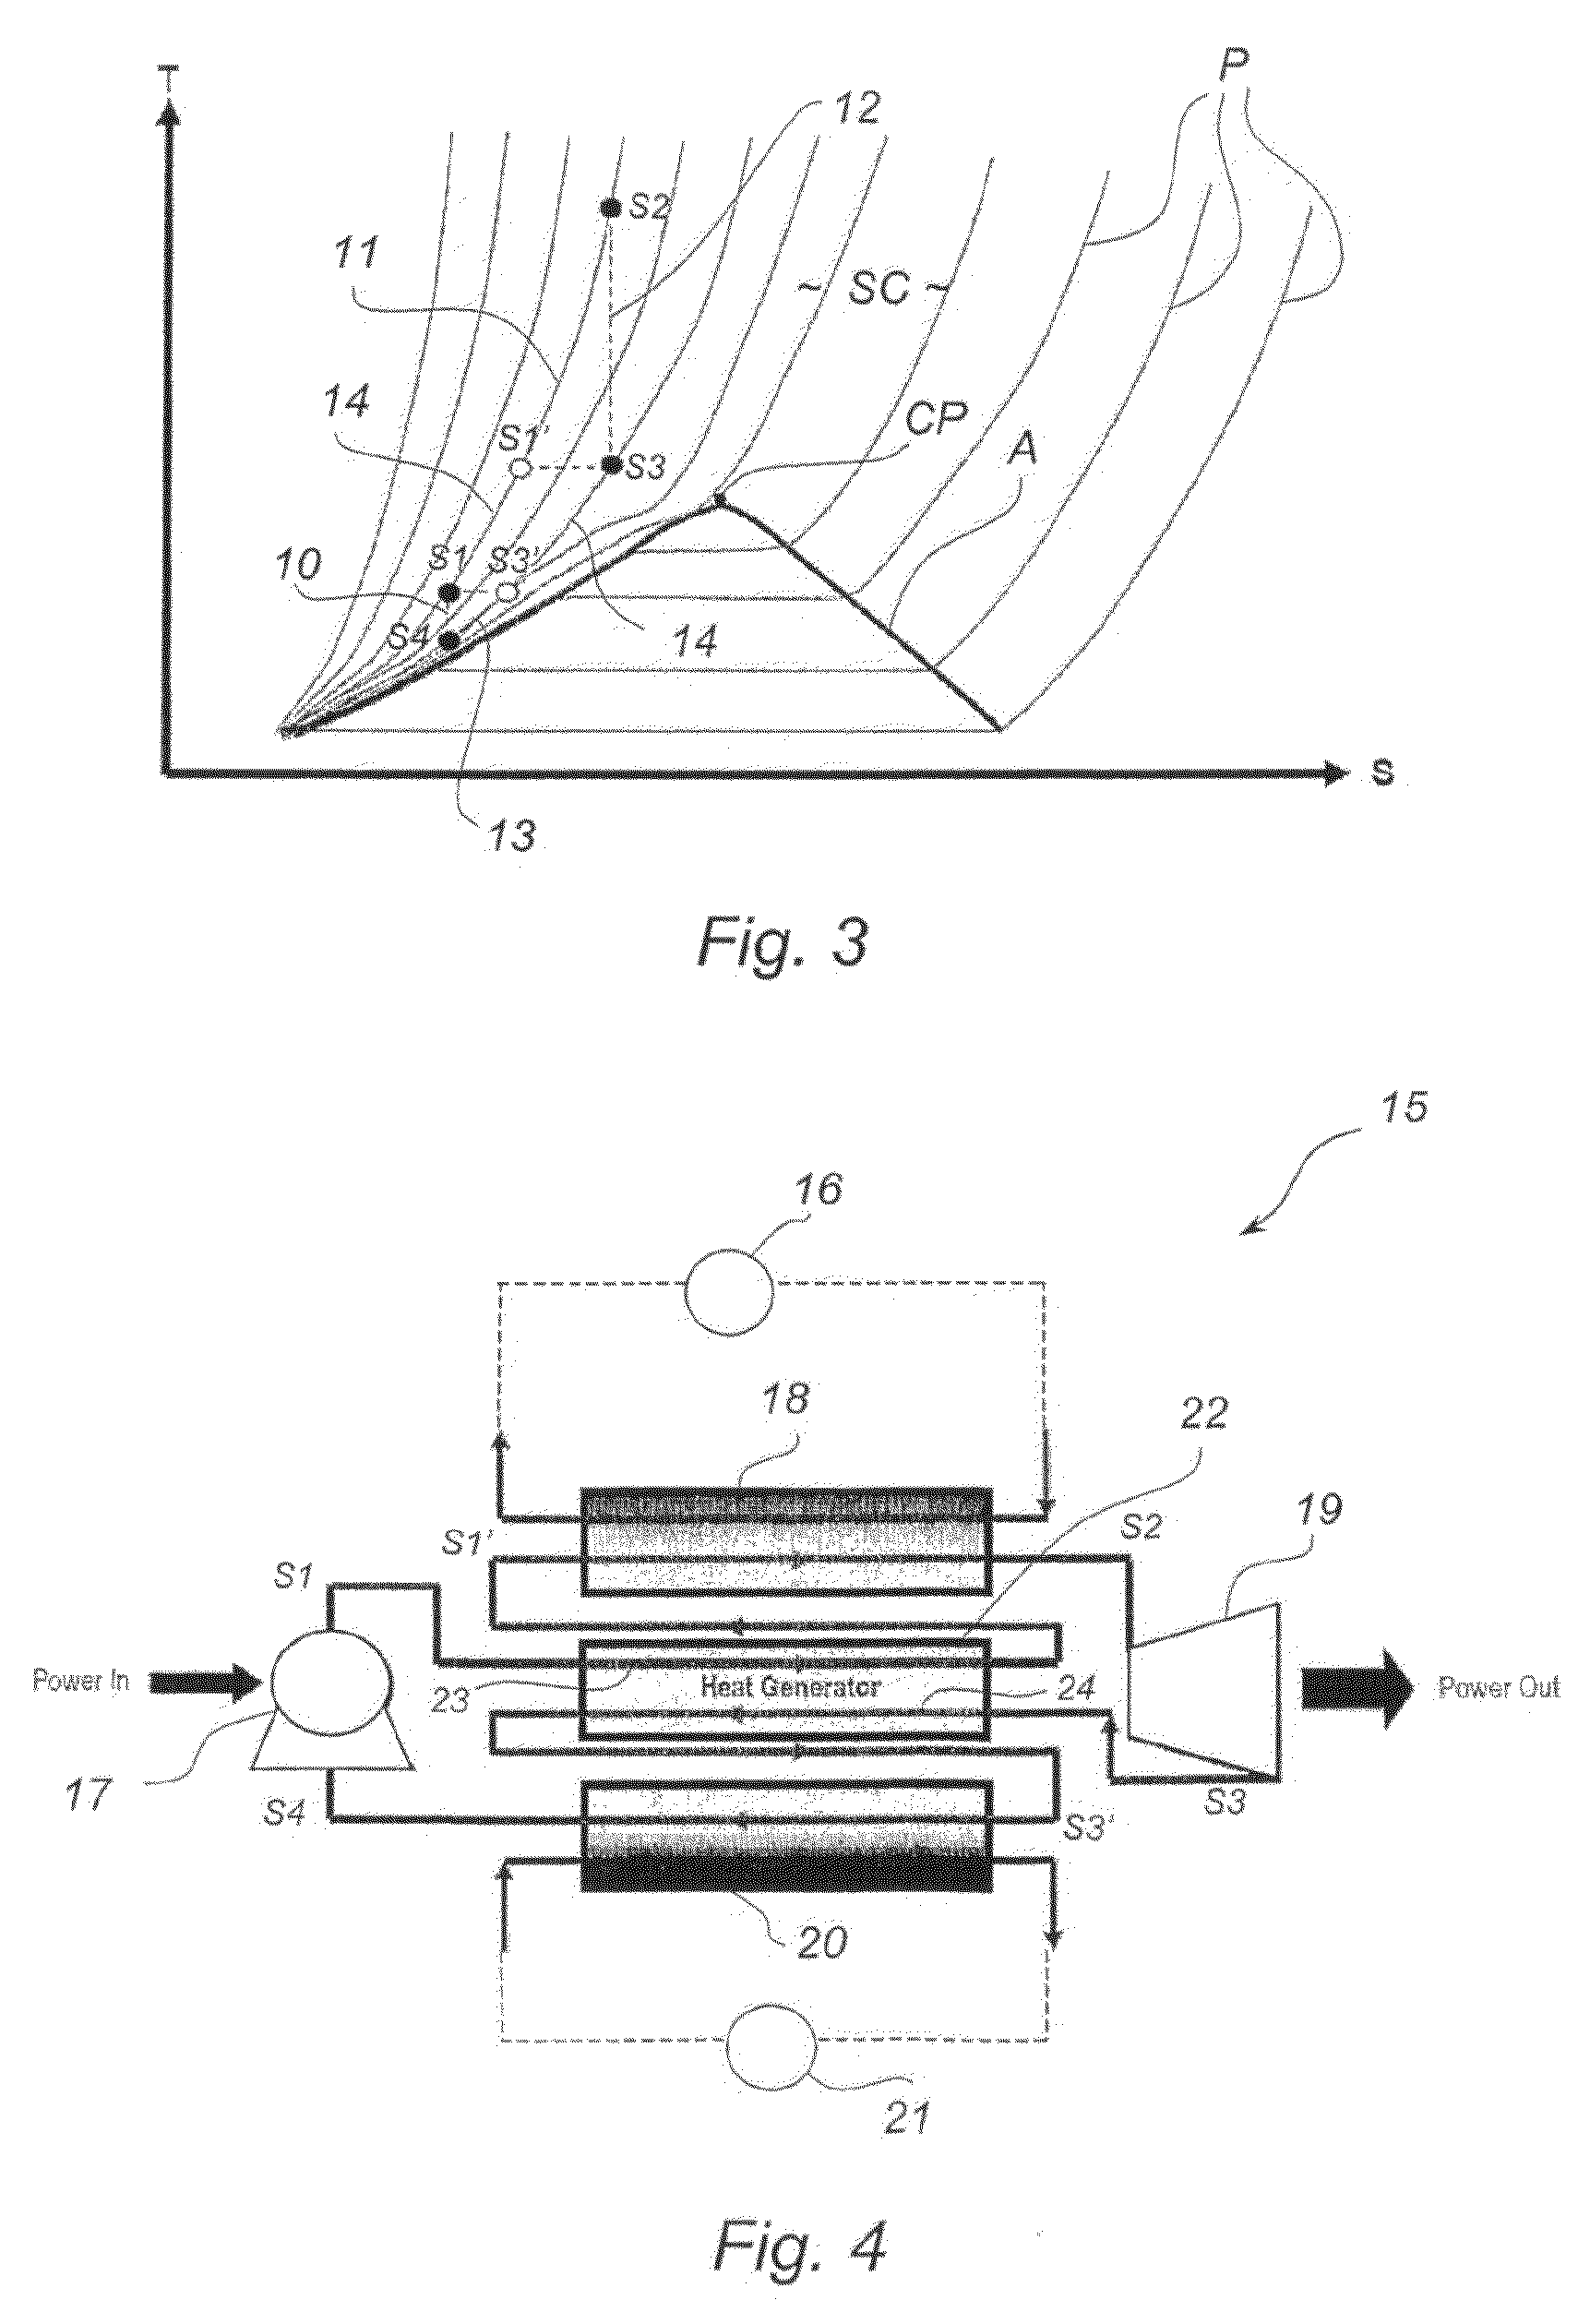 Method and system for generating power from a heat source